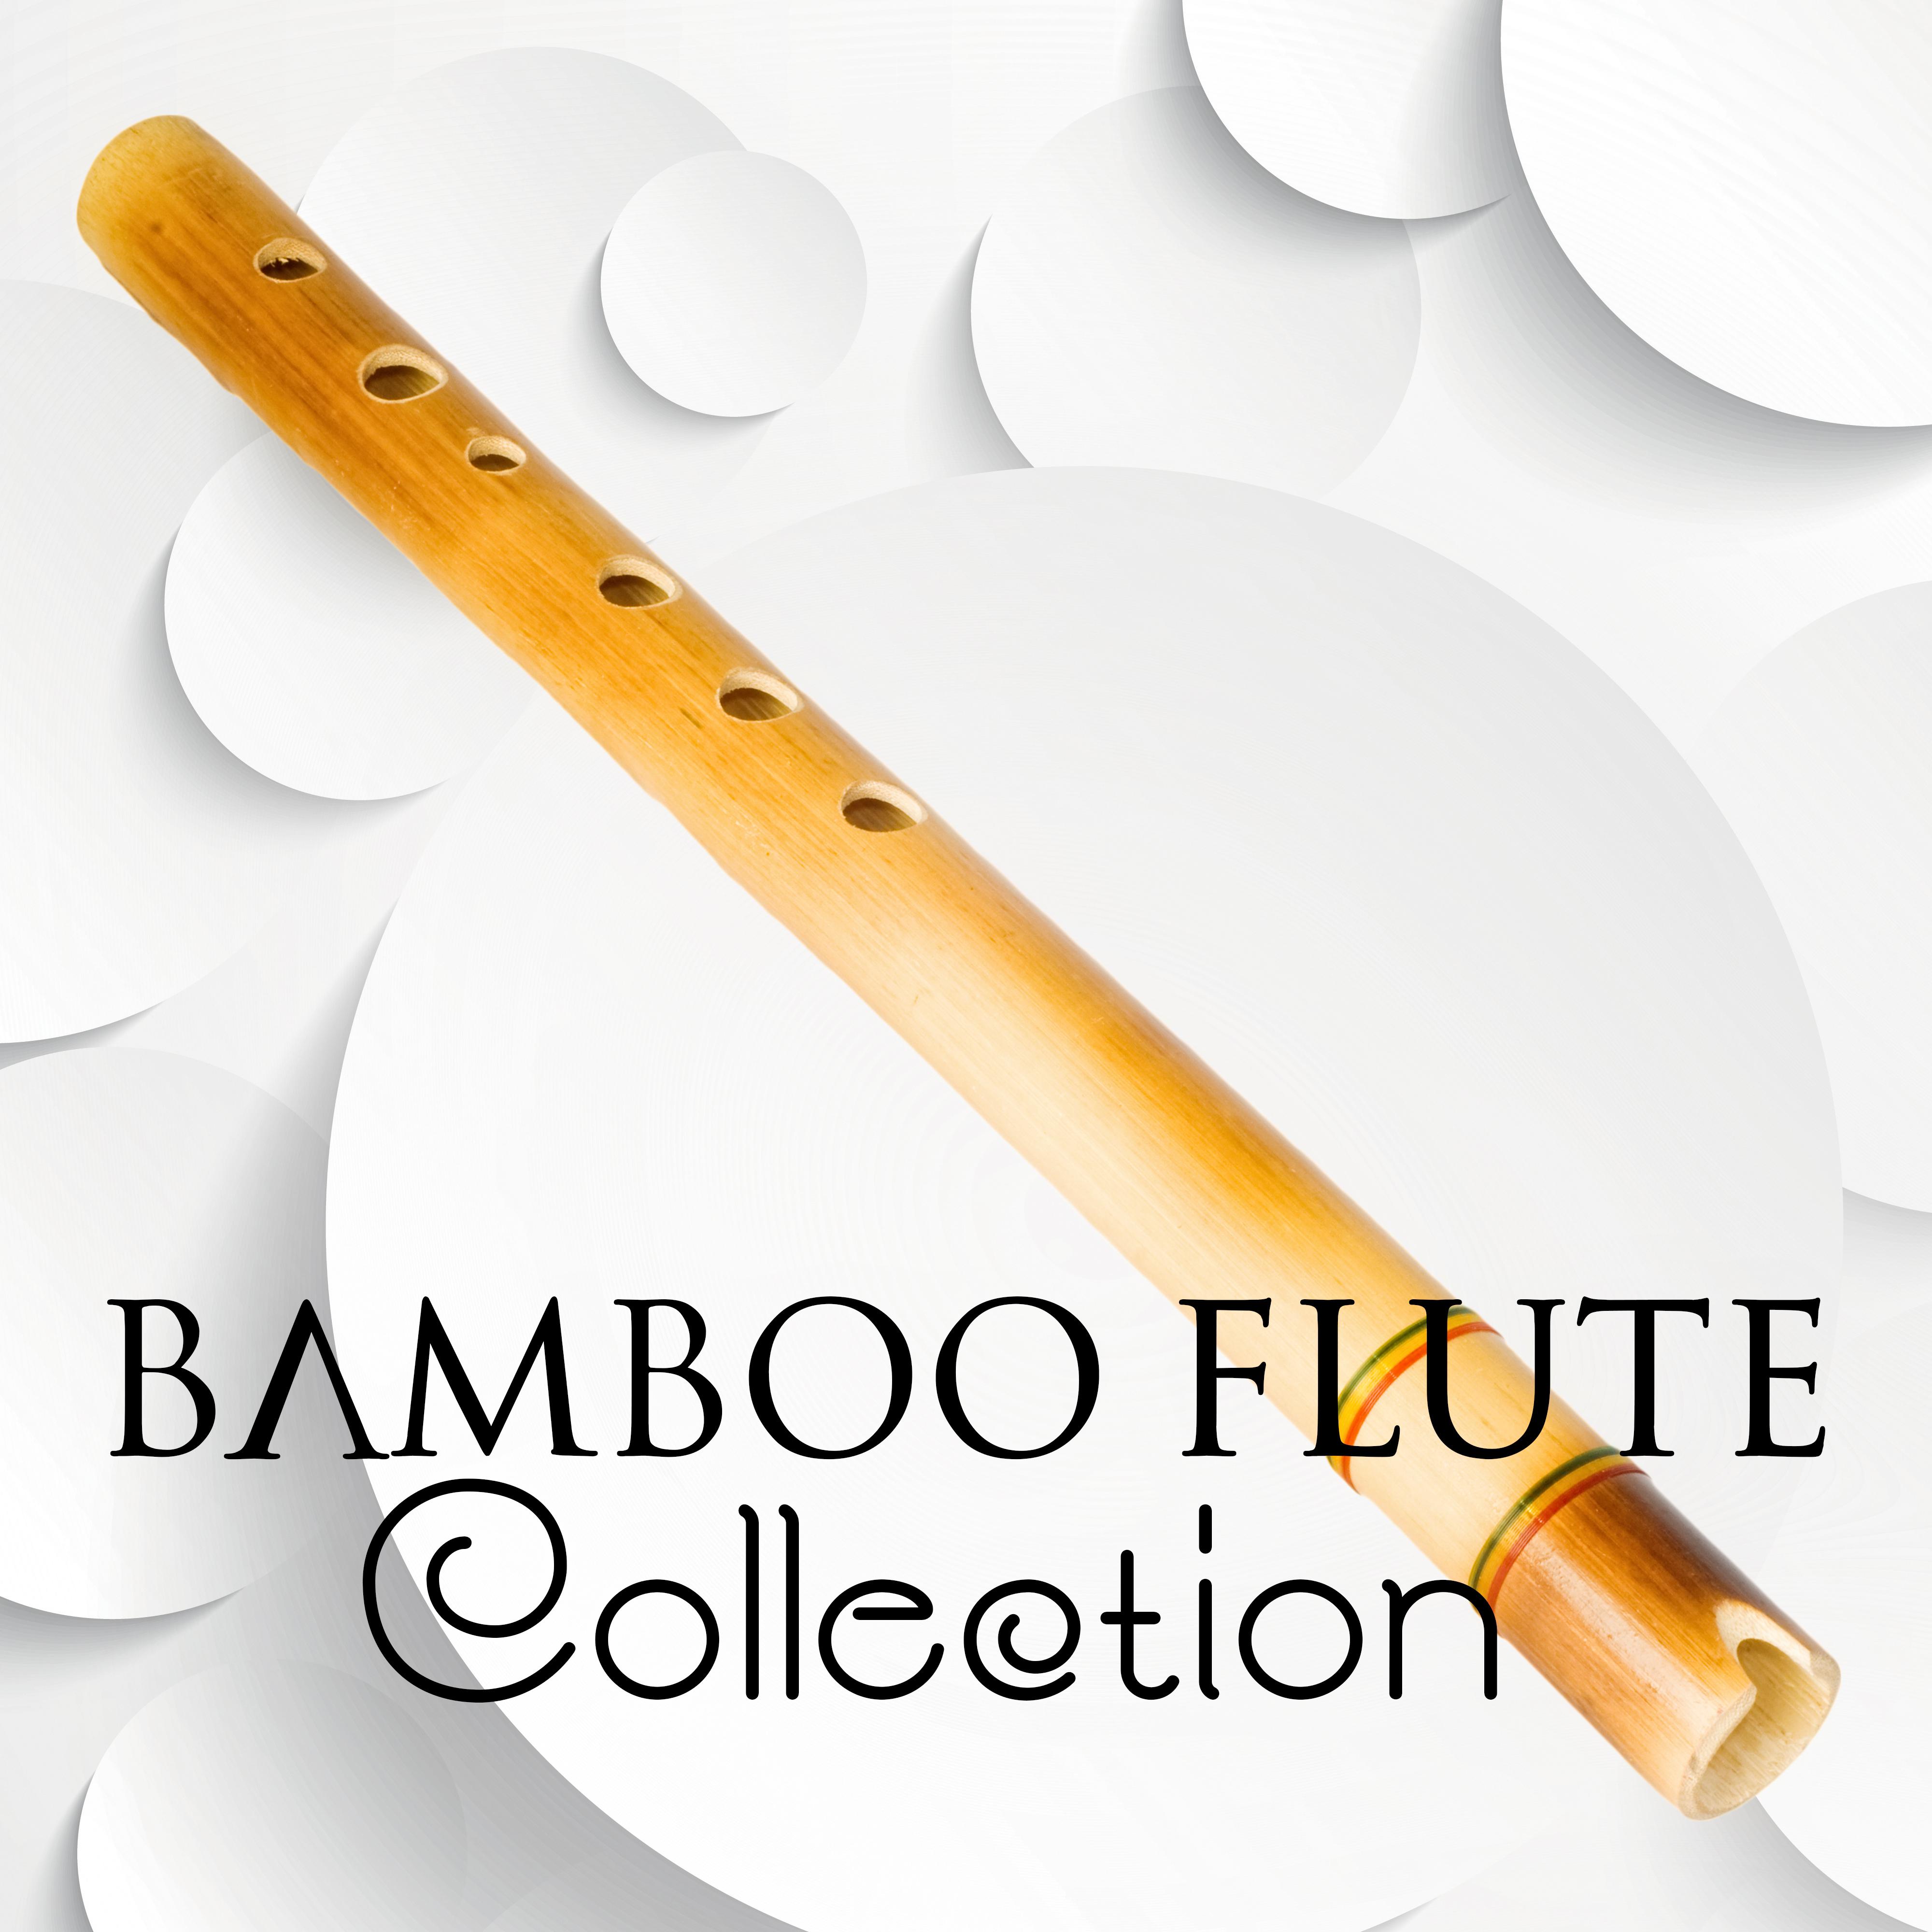 Bamboo Flute Collection  Relaxing Flute Music with Nature Sounds to Relax  Meditate, Chakra, Massage, Reiki, Sleep, Spa, Yoga, Healing Power